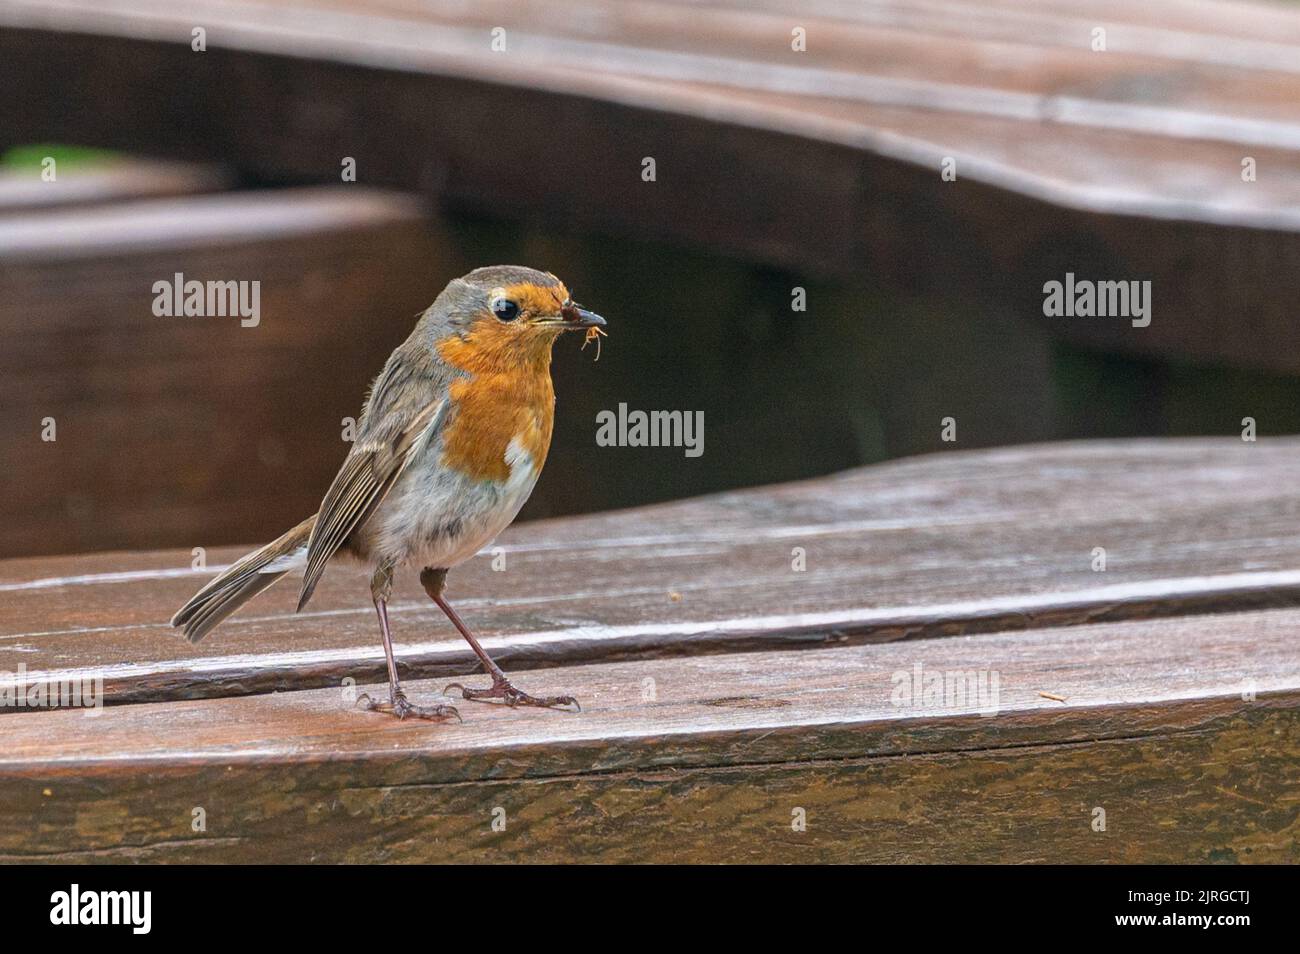 Robin bird with insect and bread in beak Stock Photo